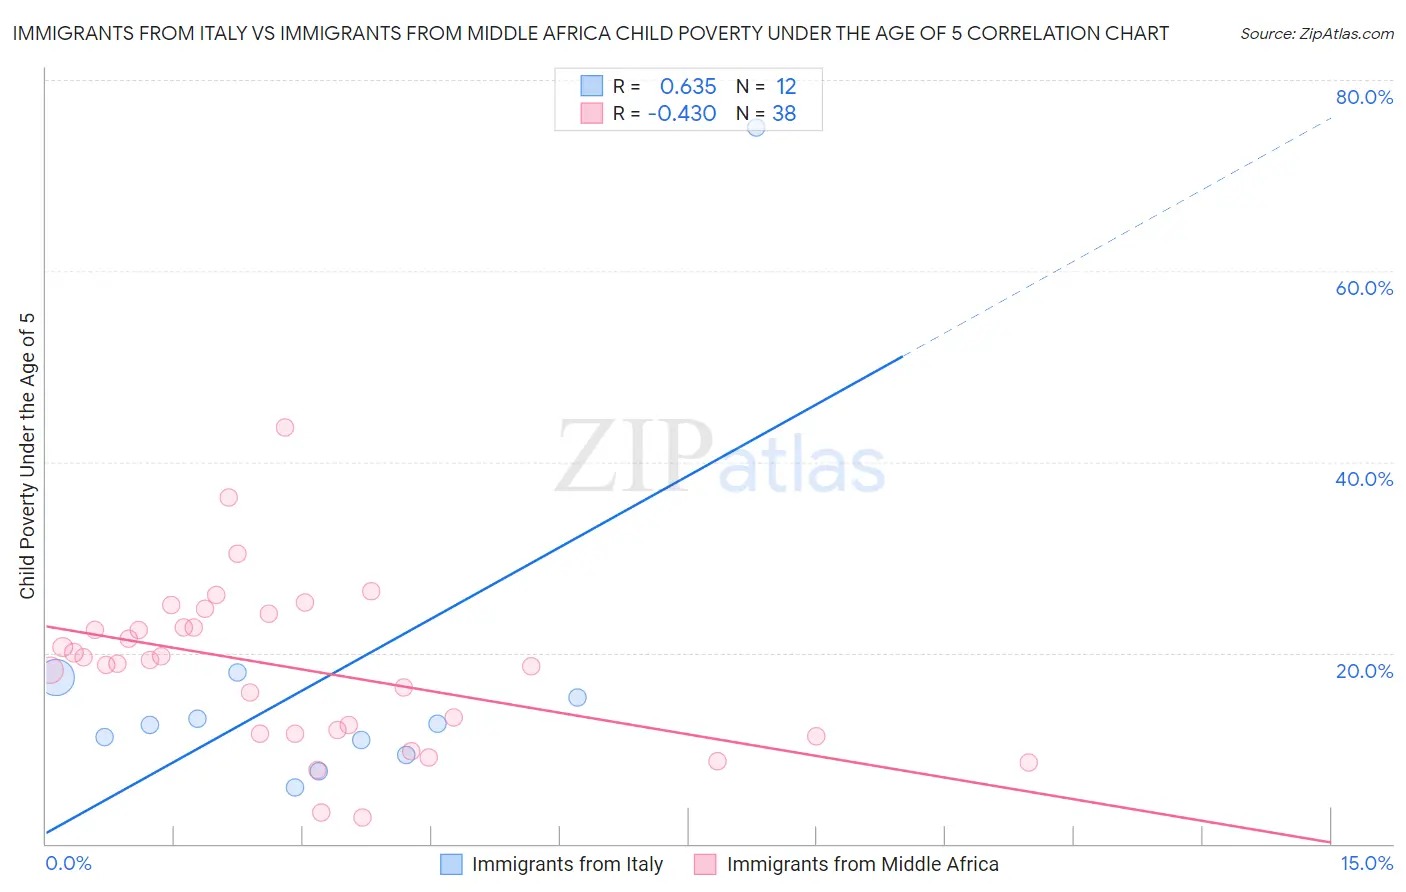 Immigrants from Italy vs Immigrants from Middle Africa Child Poverty Under the Age of 5